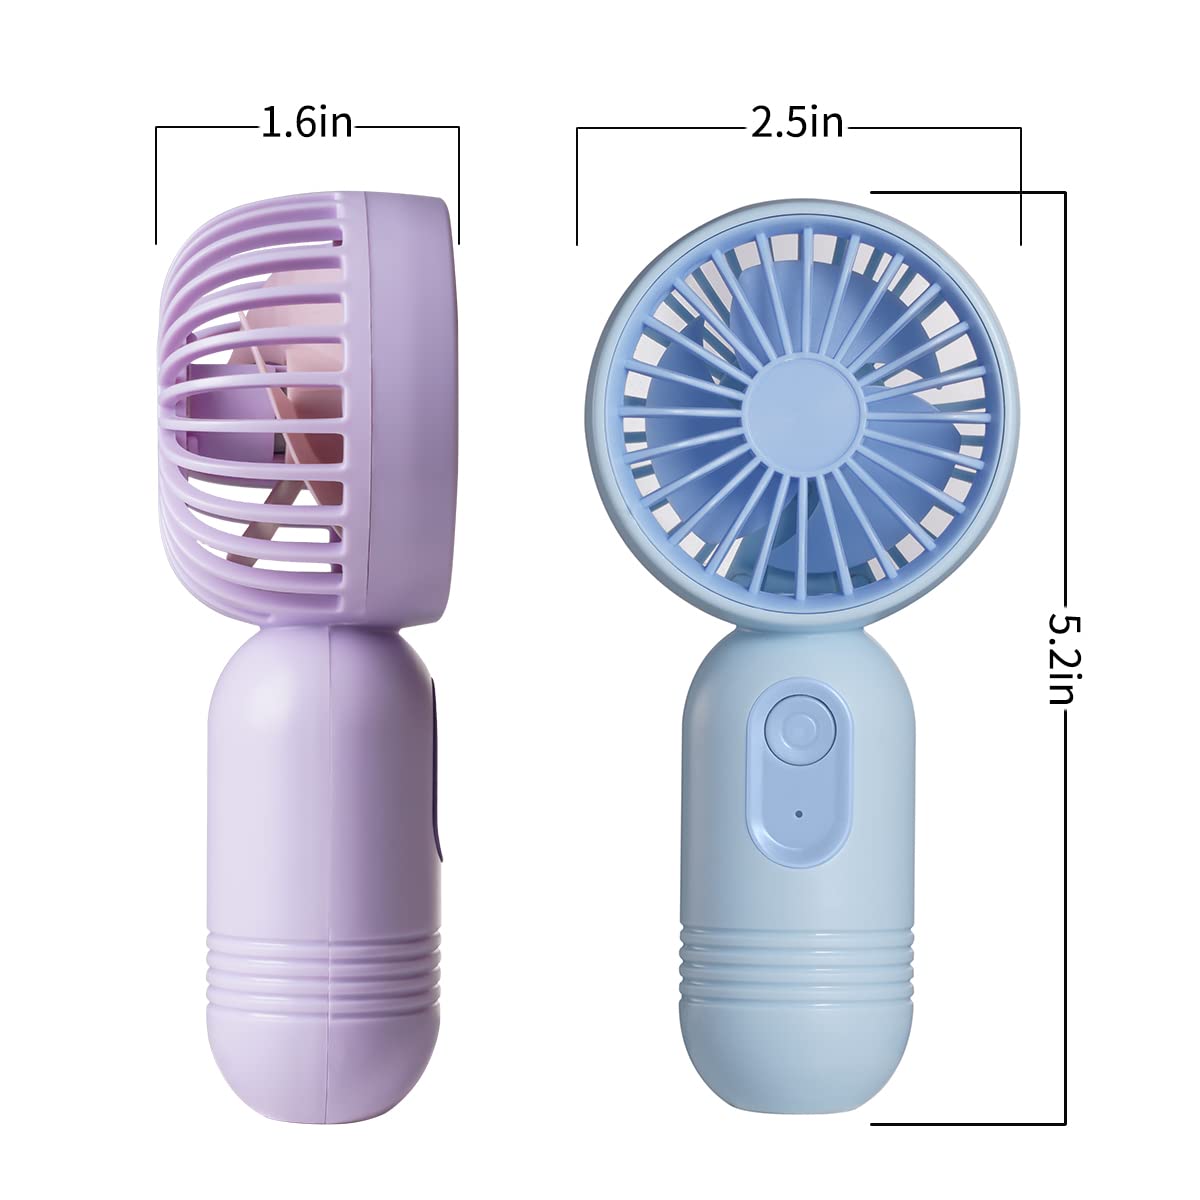 VanSmaGo 3Packs Portable Handheld Mini Fan, USB Rechargeable Personal Fan, Battery Operated Small neck Fan with 3 Speeds for Travel/camping/Outdoor/Home/Office (Pink+Blue+Purple)